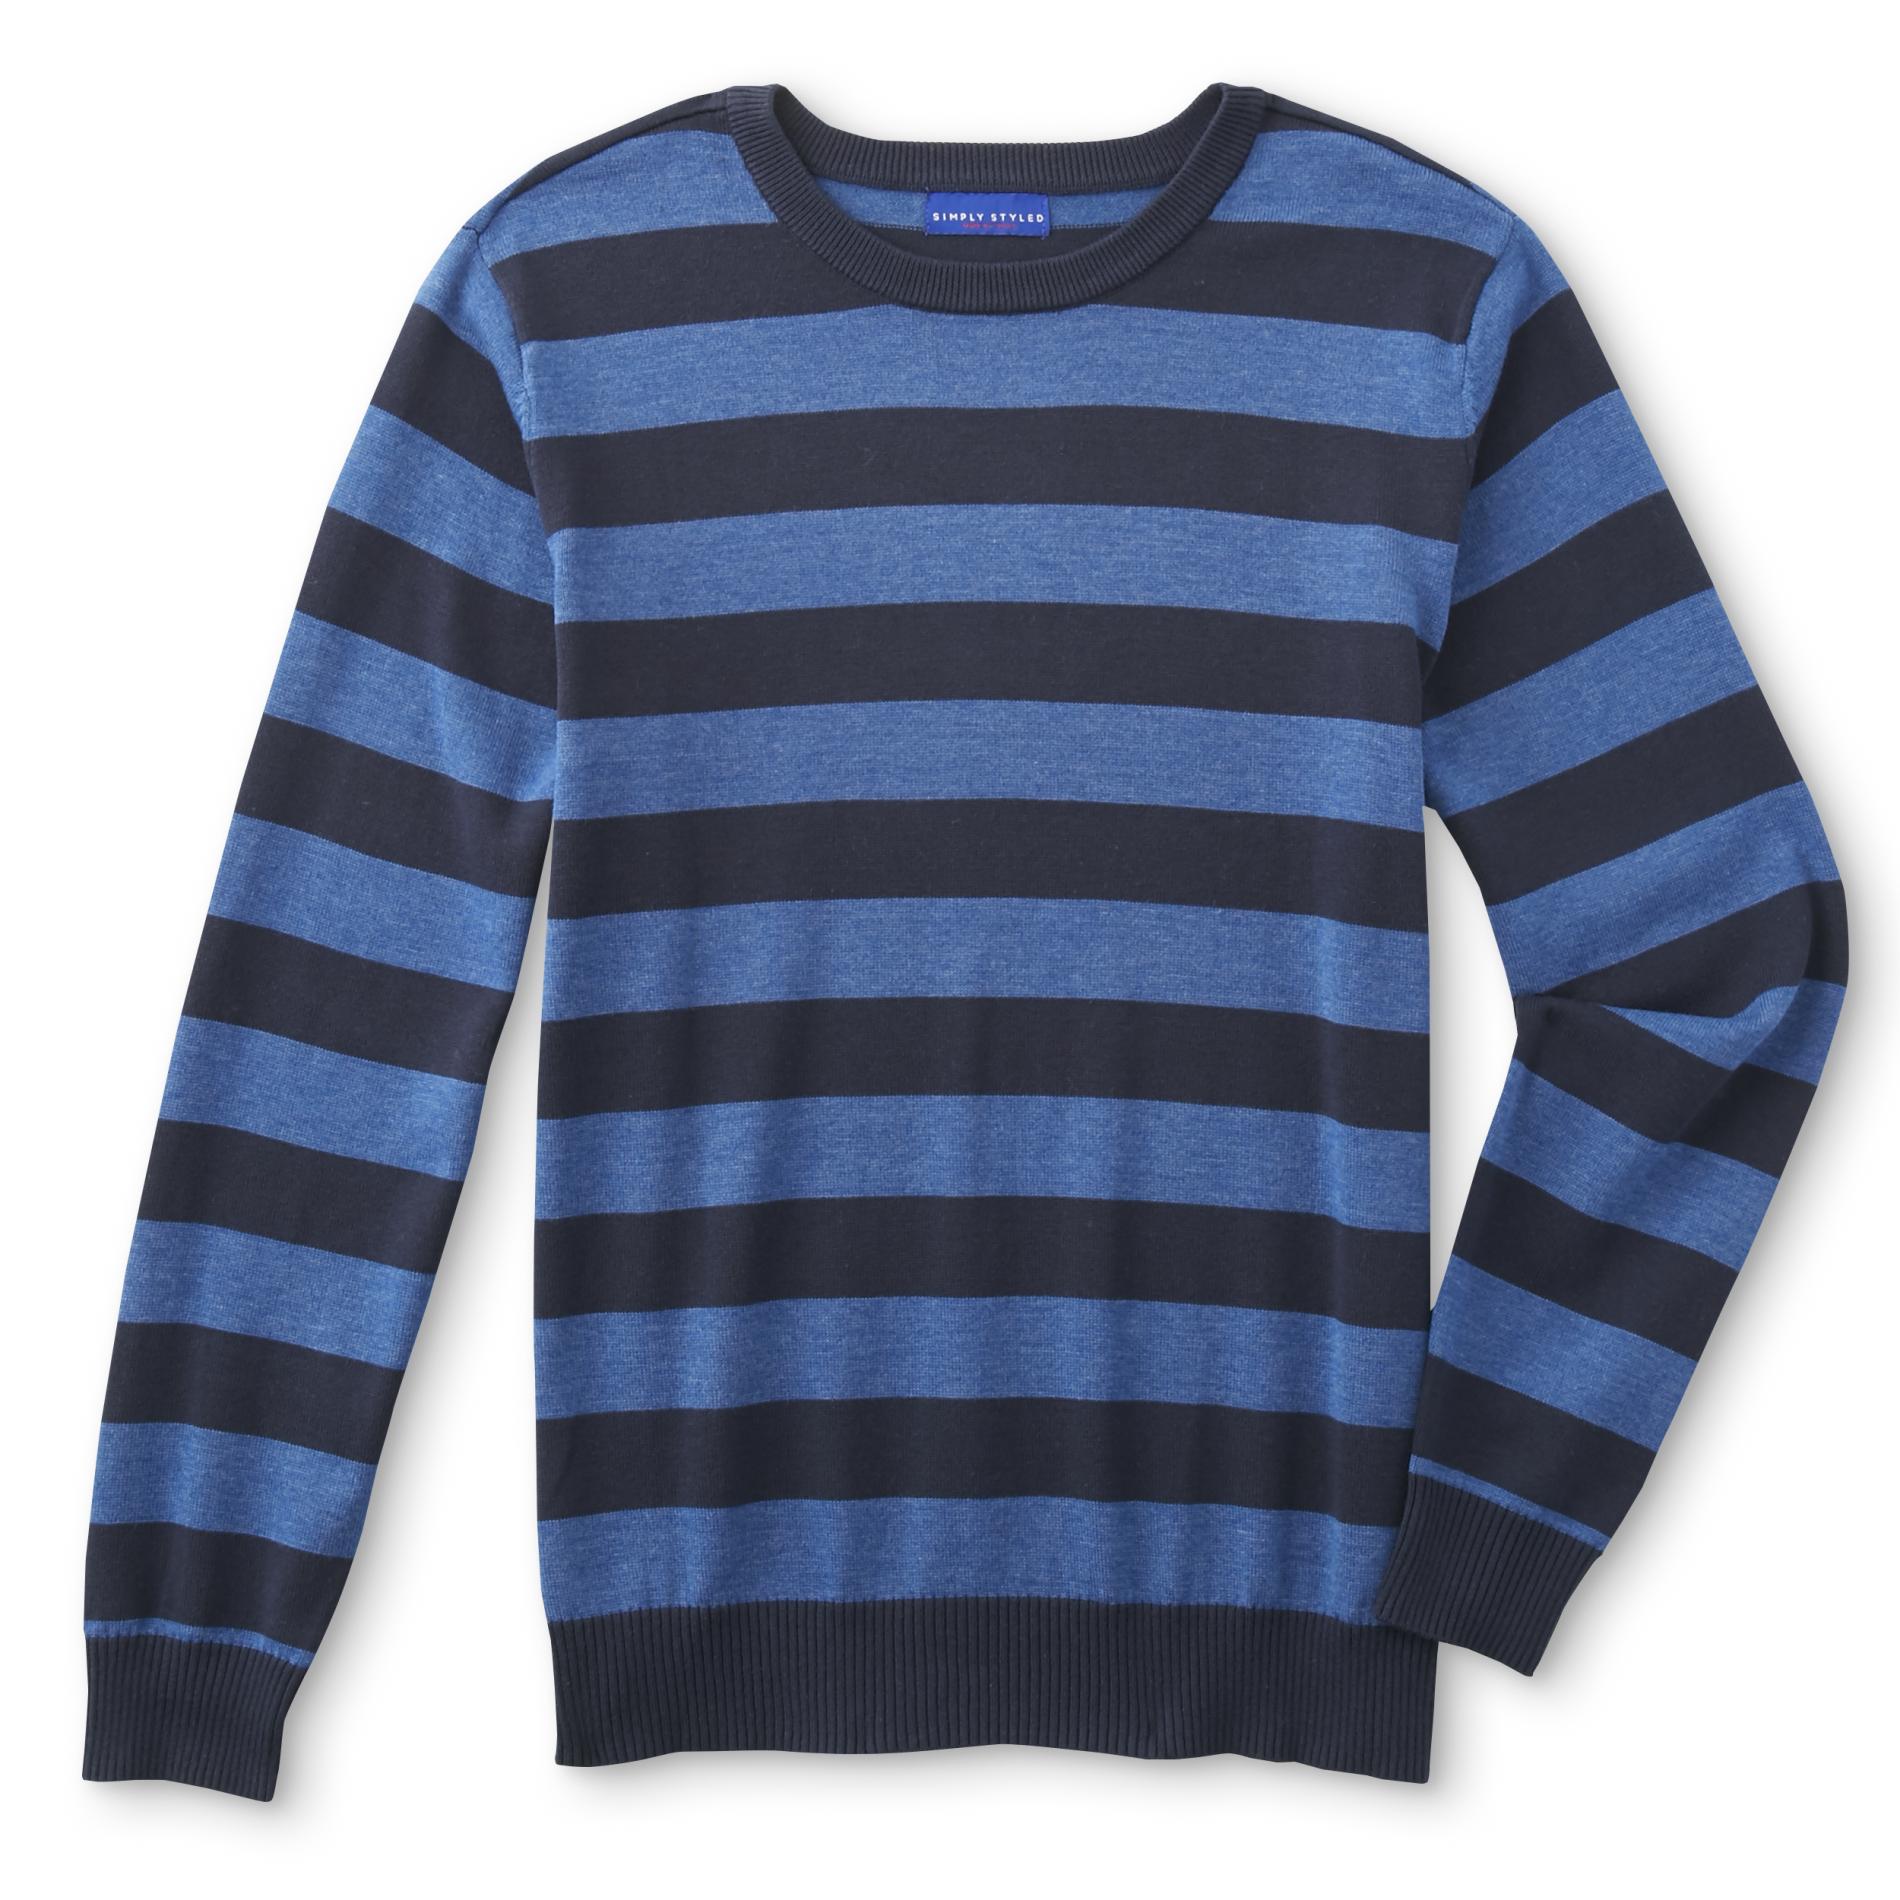 Simply Styled Men's Sweater - Rugby Striped